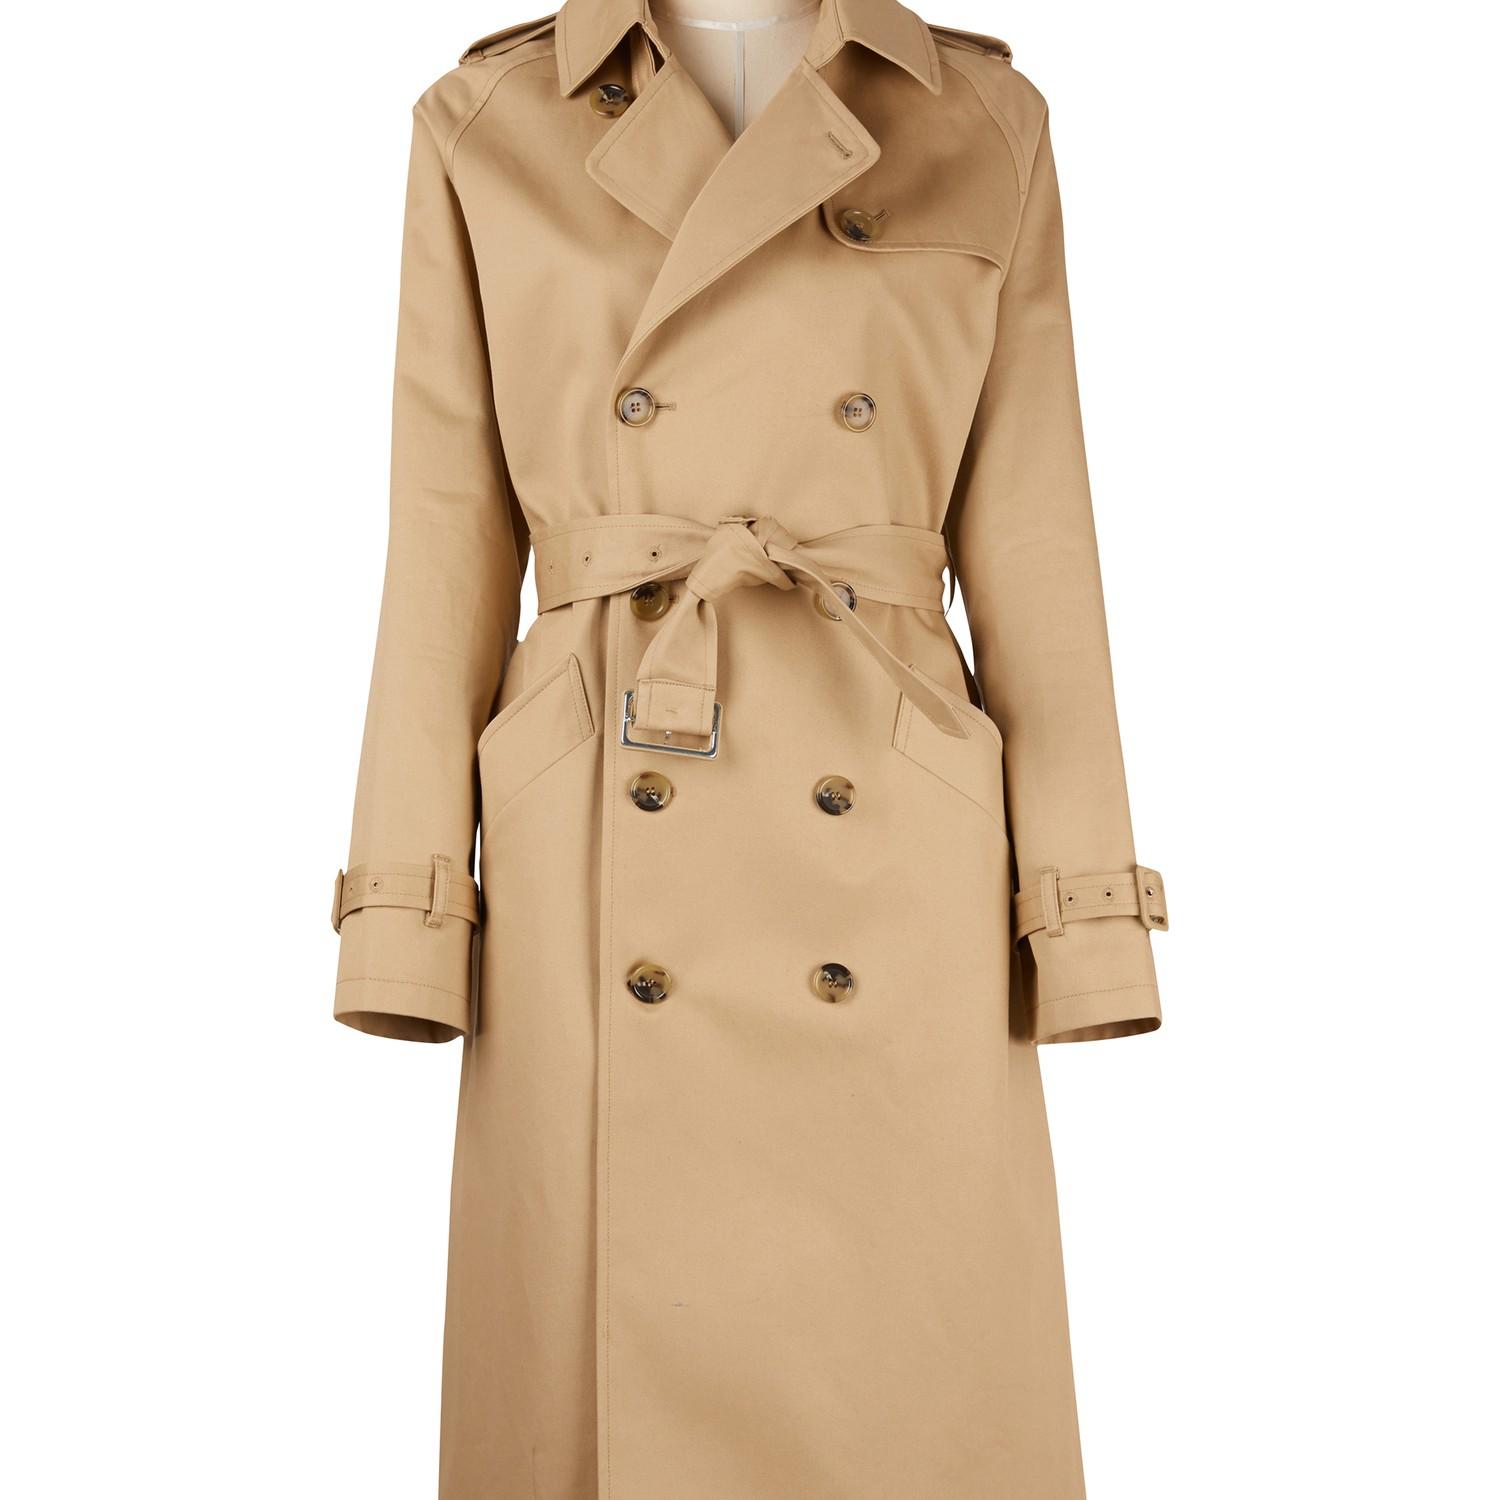 A.P.C. Cotton Greta Trench Coat in Beige (Natural) - Lyst